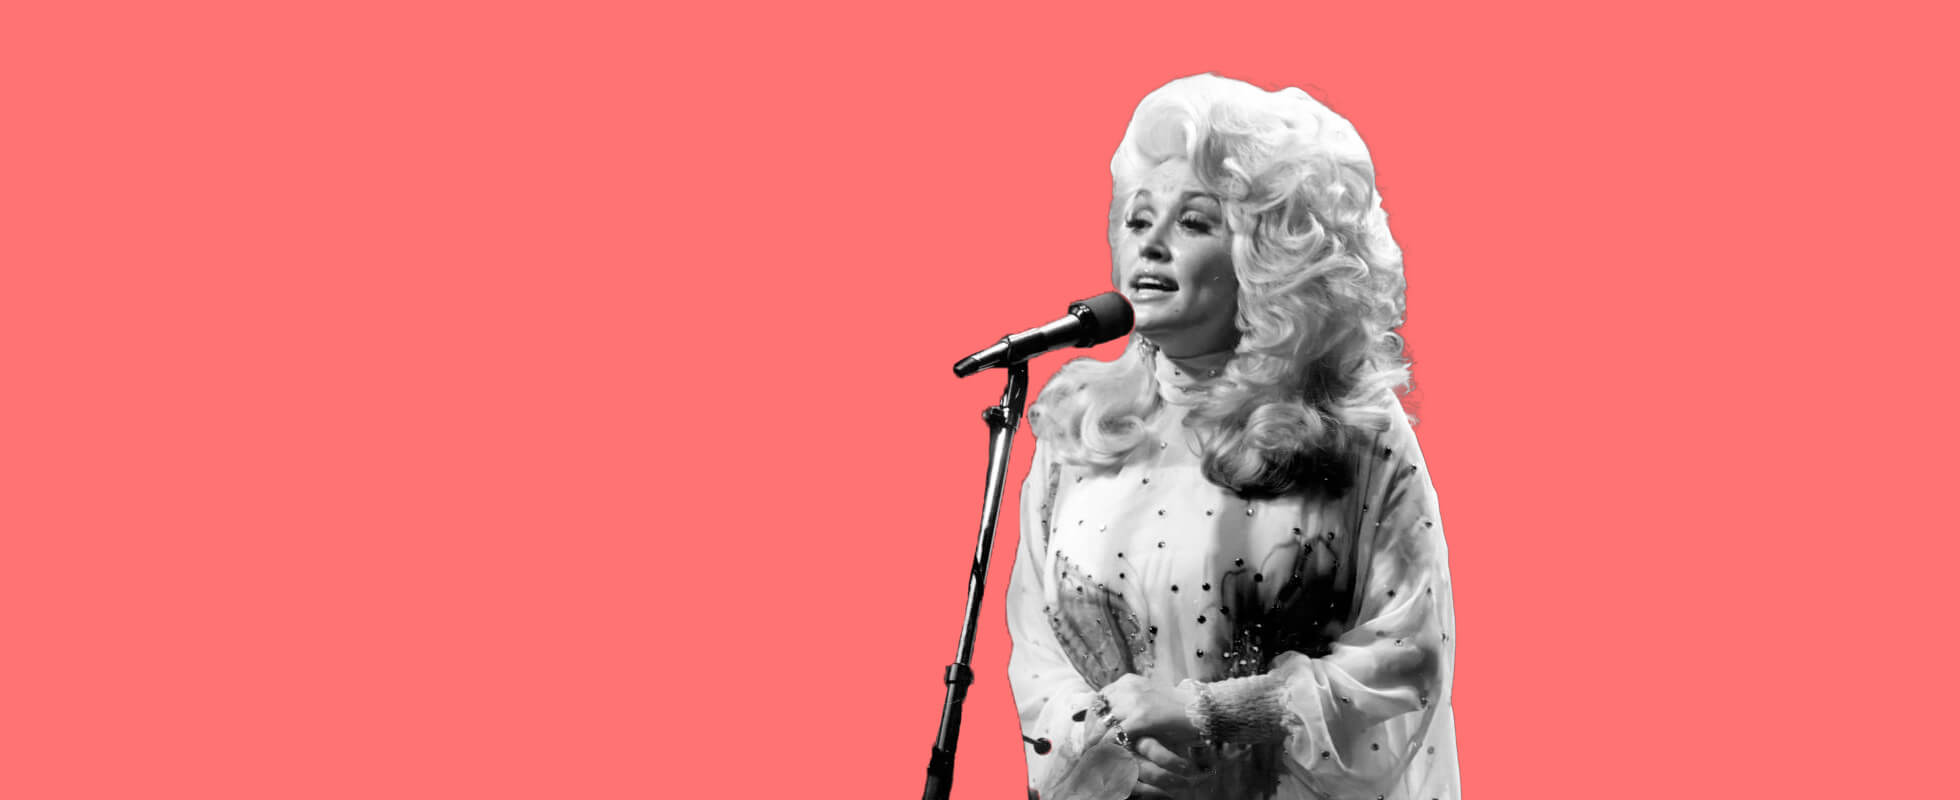 Dolly Parton Quotes to Live By | Inspiring Quotes